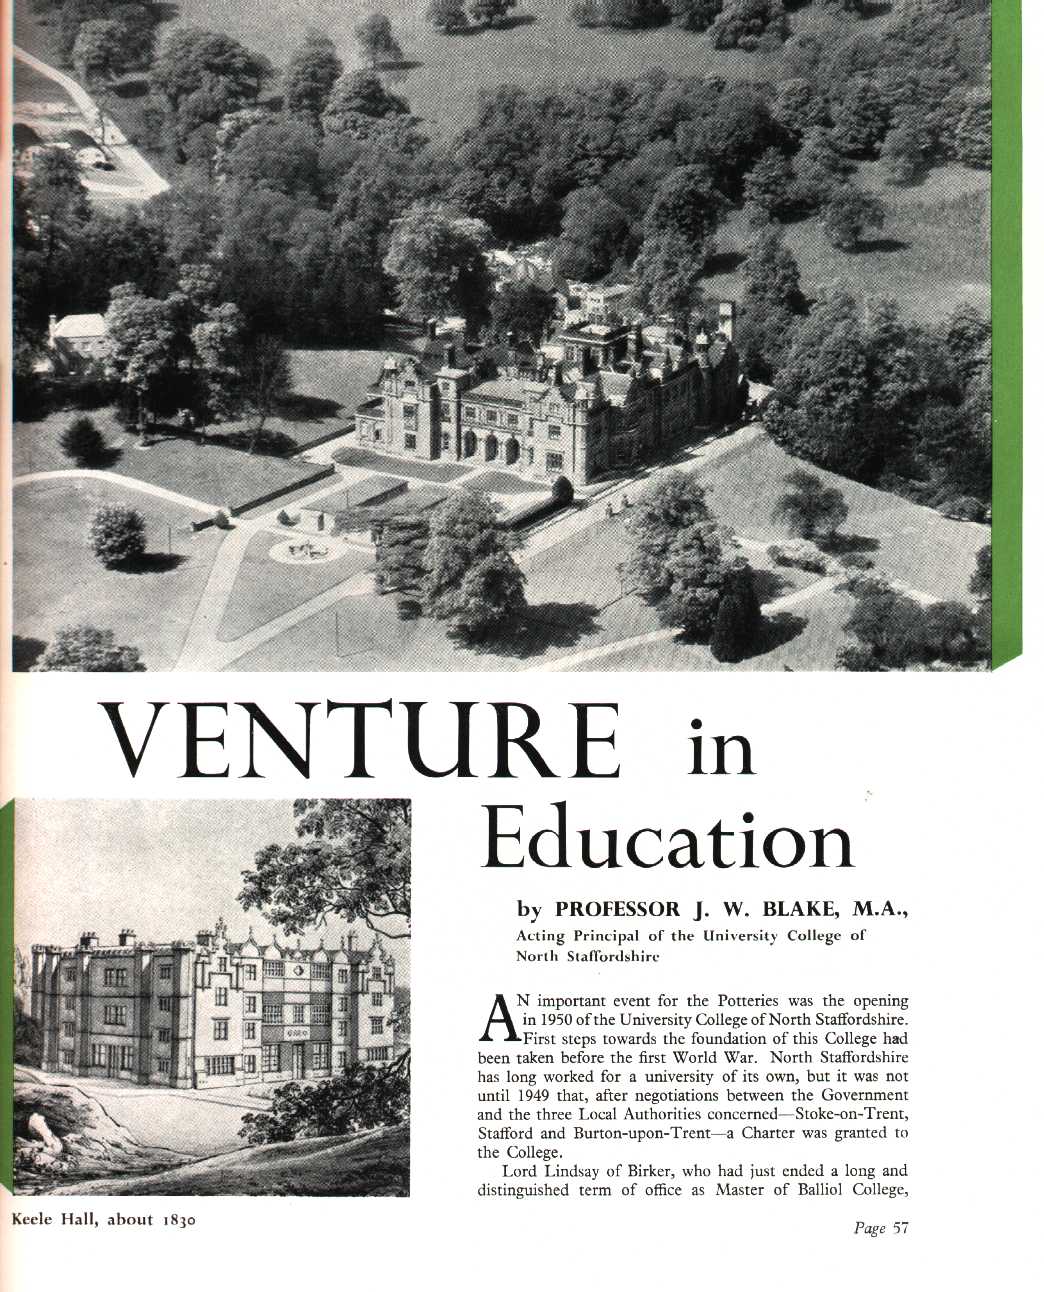 Venture in Education" Article on the University College of North Staffordshire (Now Keele University)